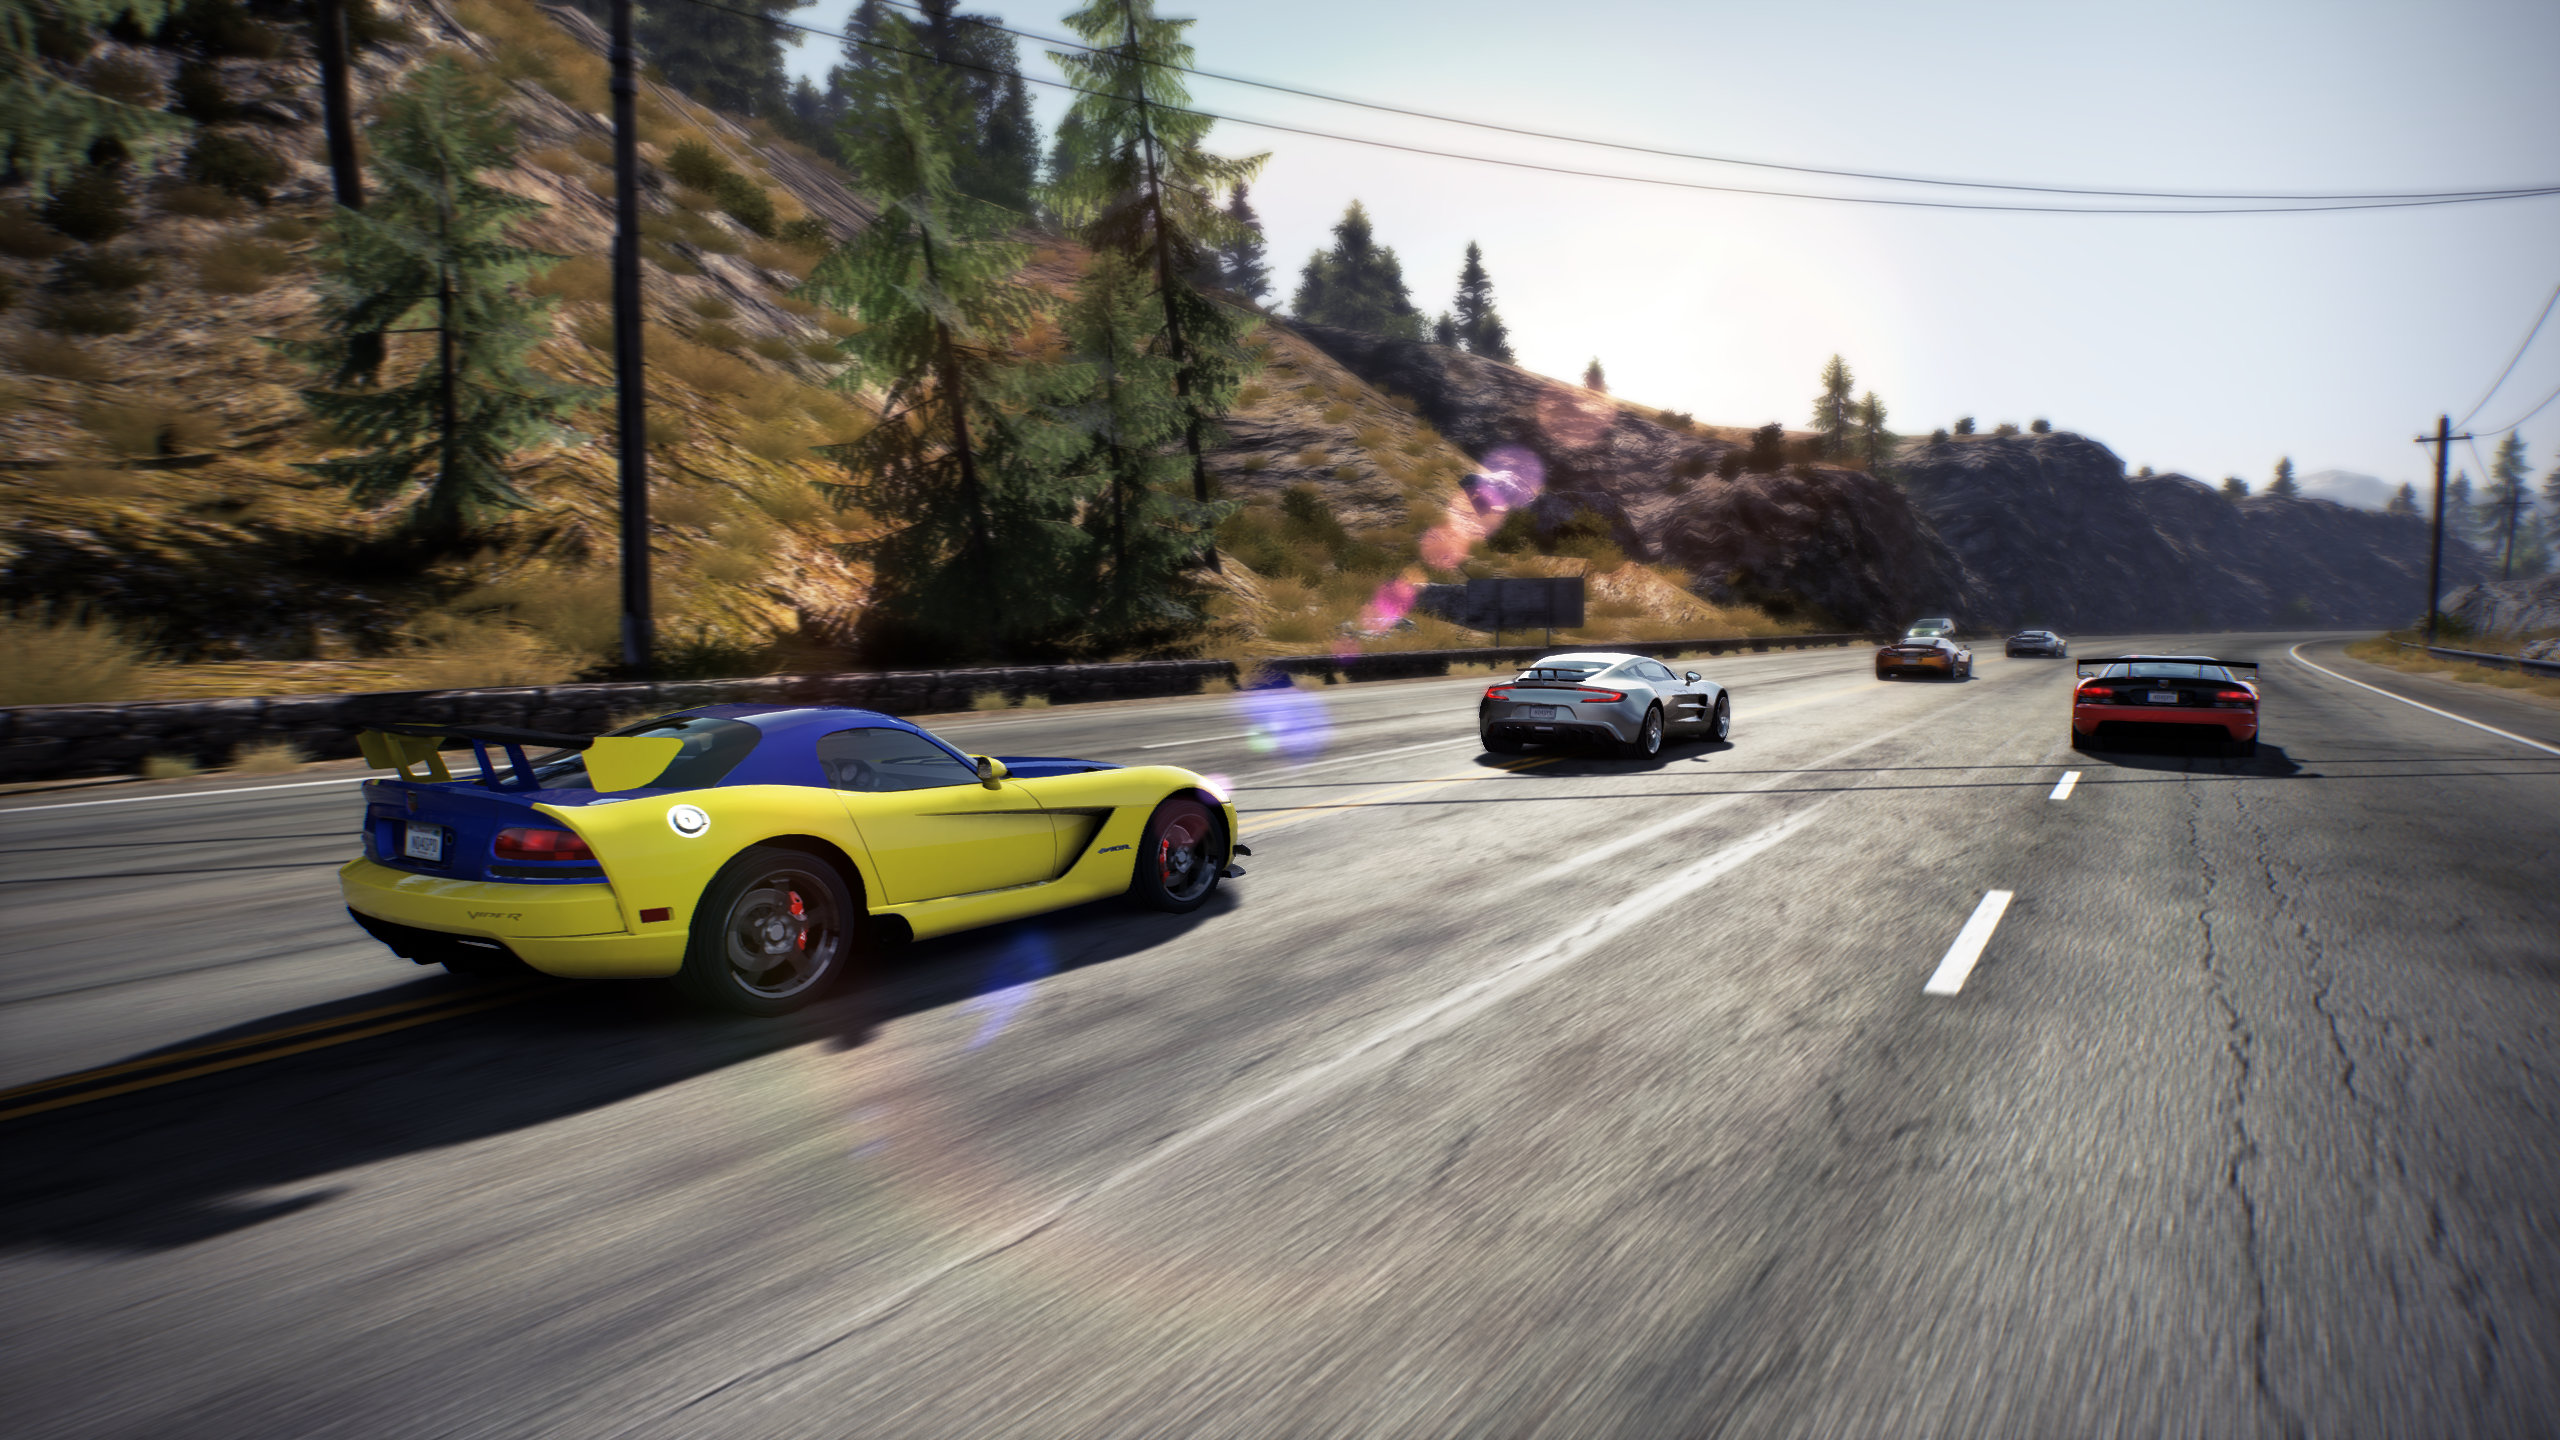 Need for Speed Hot Pursuit Remastered: A nostalgic hug that could've used  more love - CNET